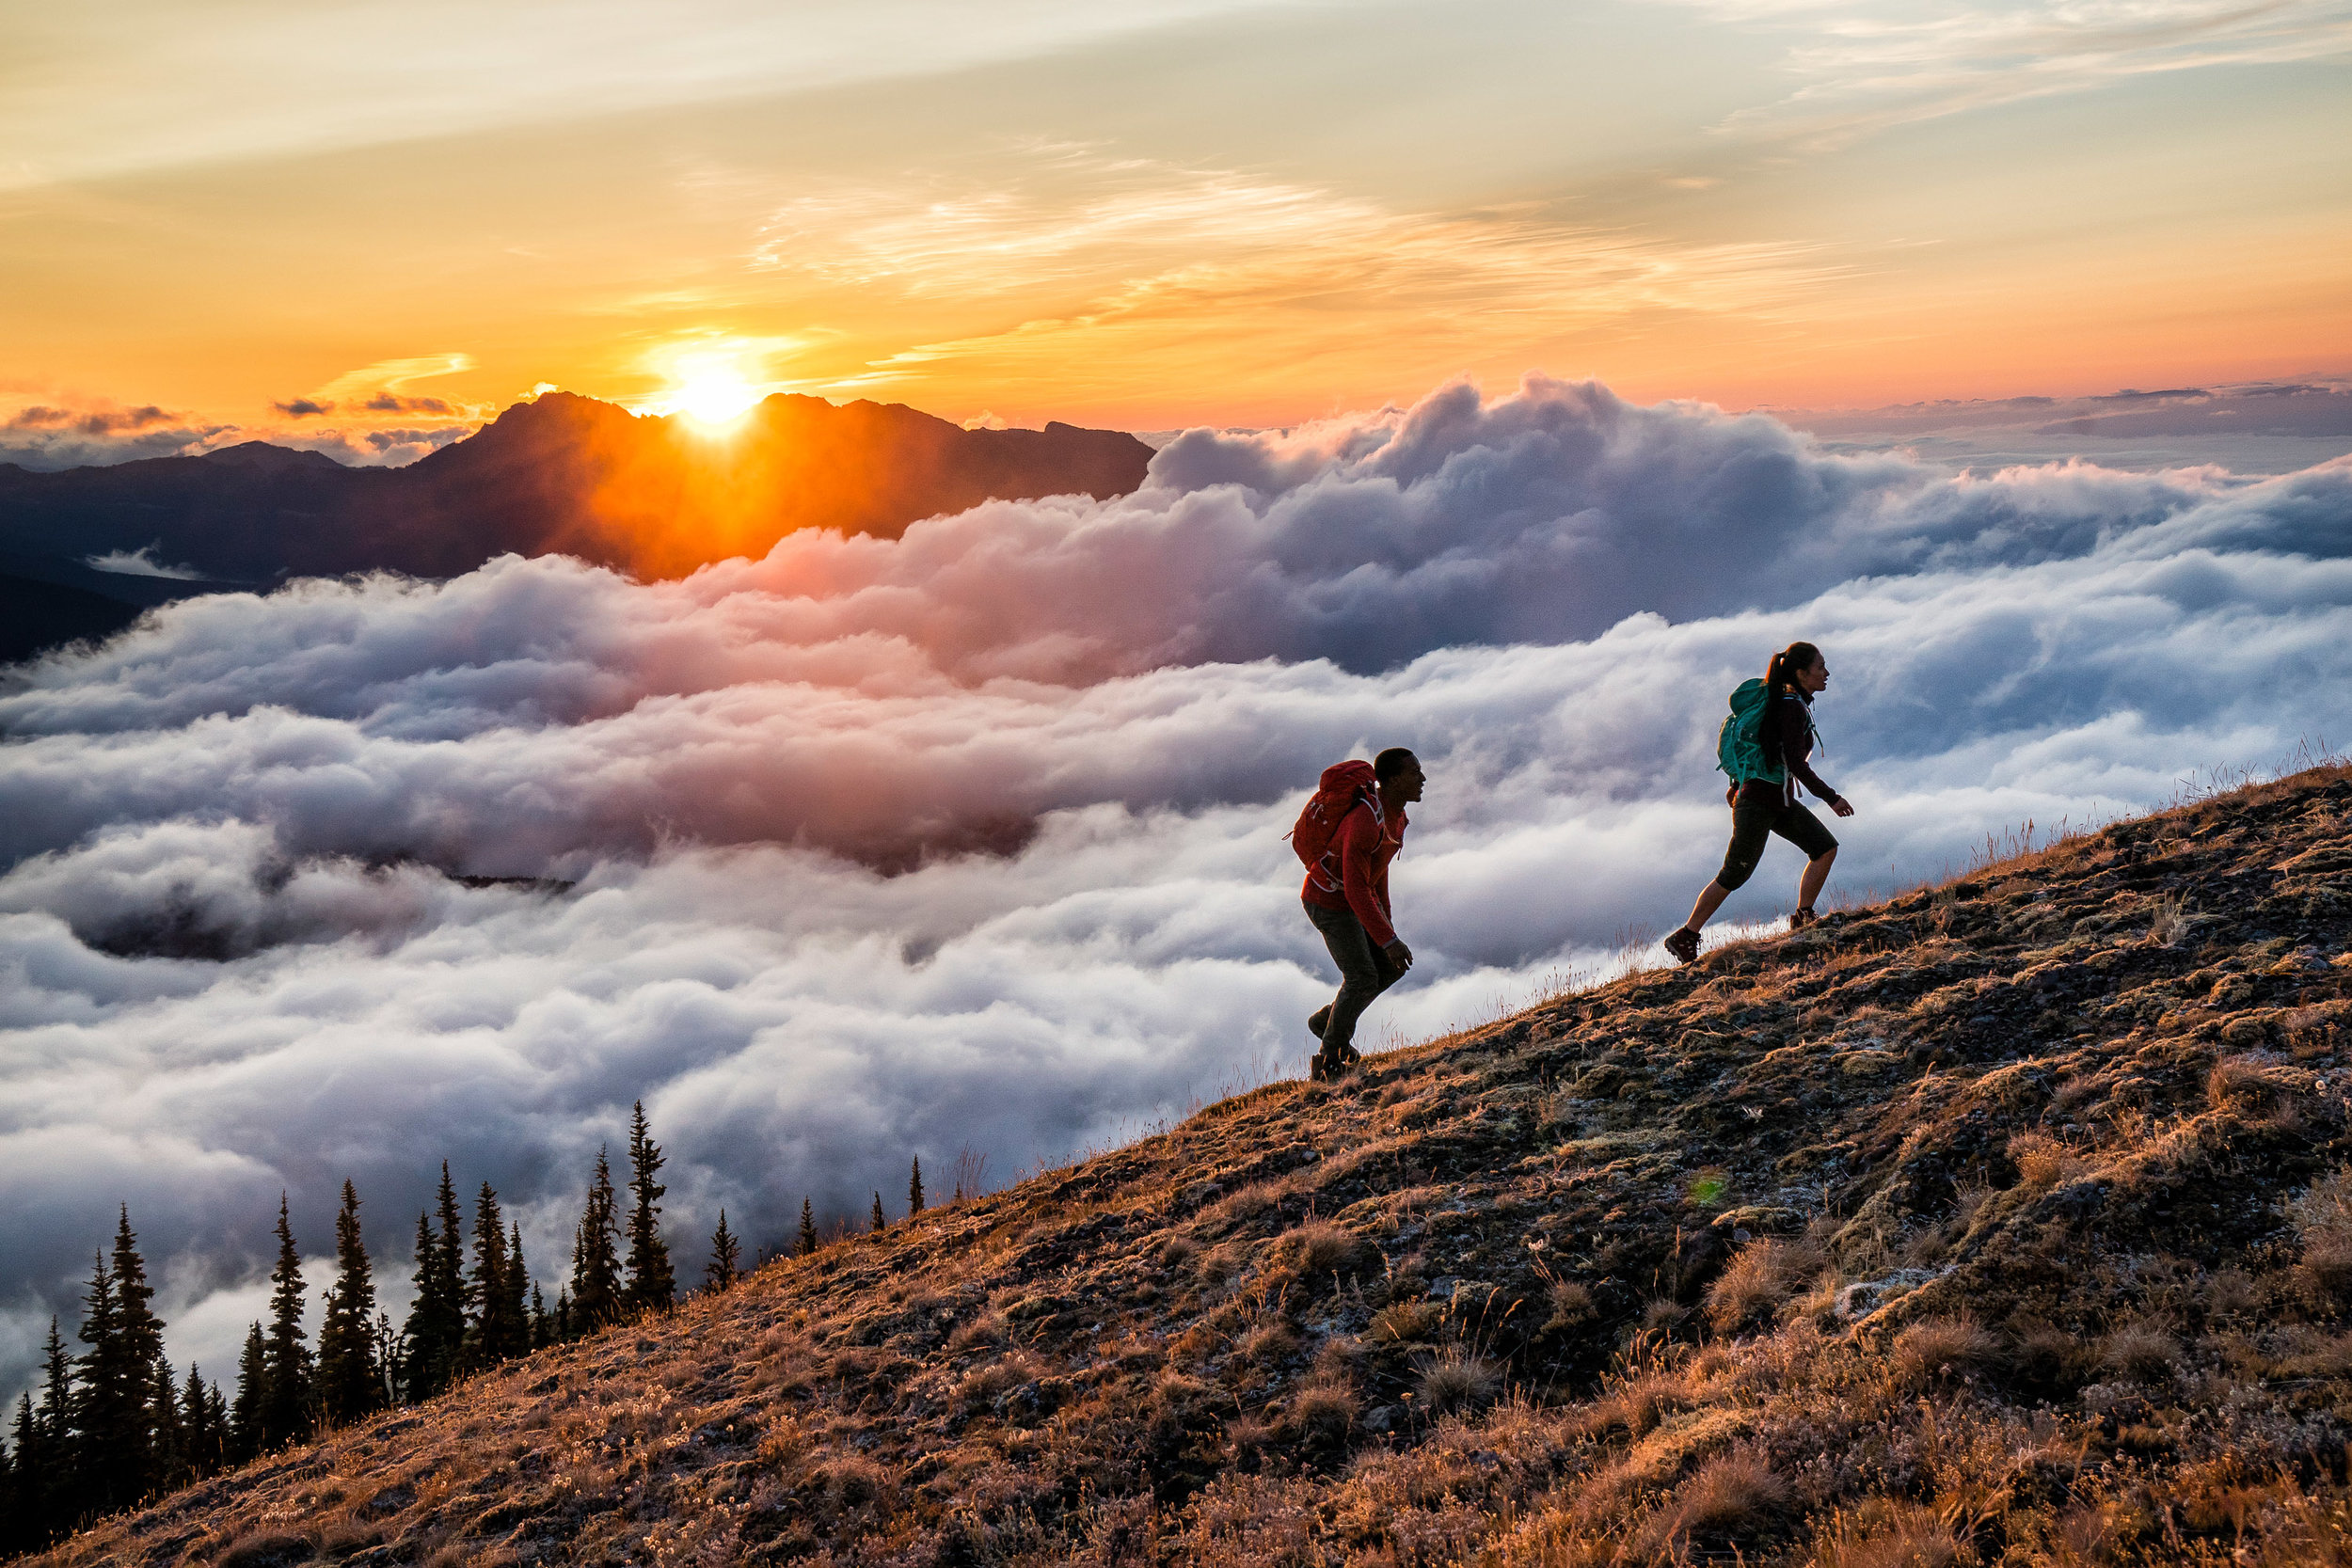  Adventure: Hiking in Olympic National Park in summertime, Olympic National Park, Washington 